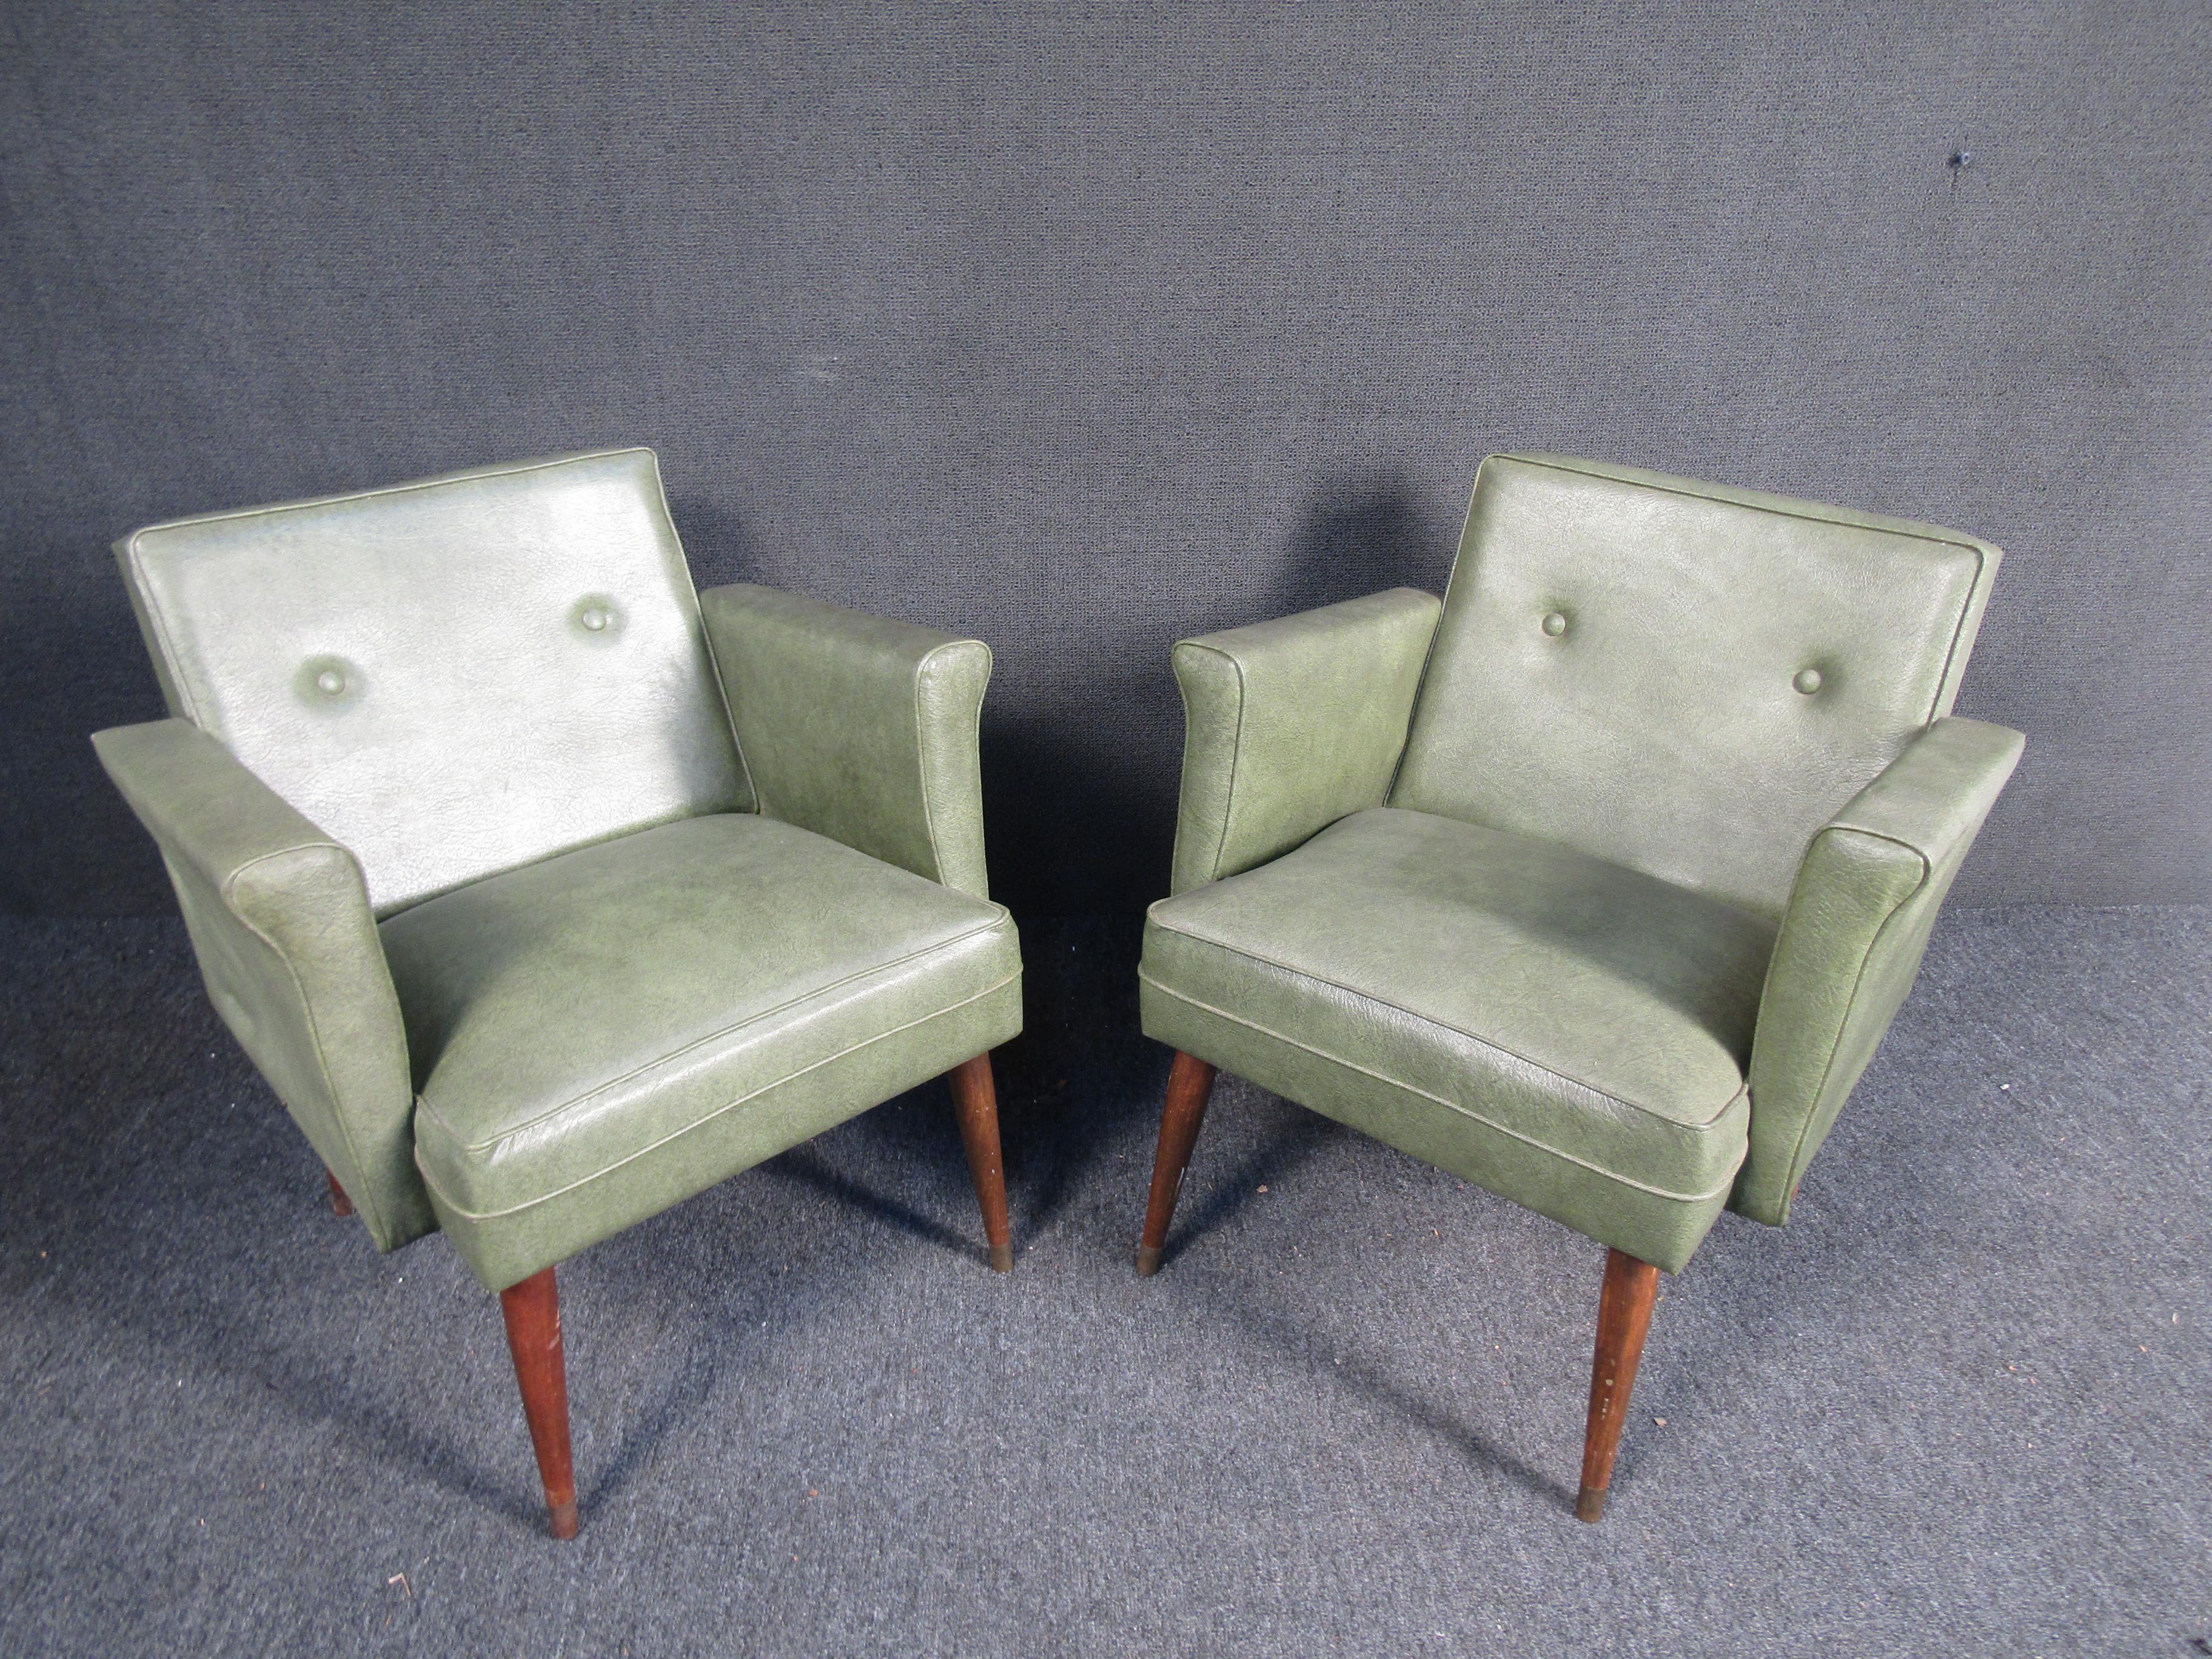 Unique pair of Mid-Century Modern style green leather chairs. 
(Please confirm item location - NY or NJ - with dealer).
    